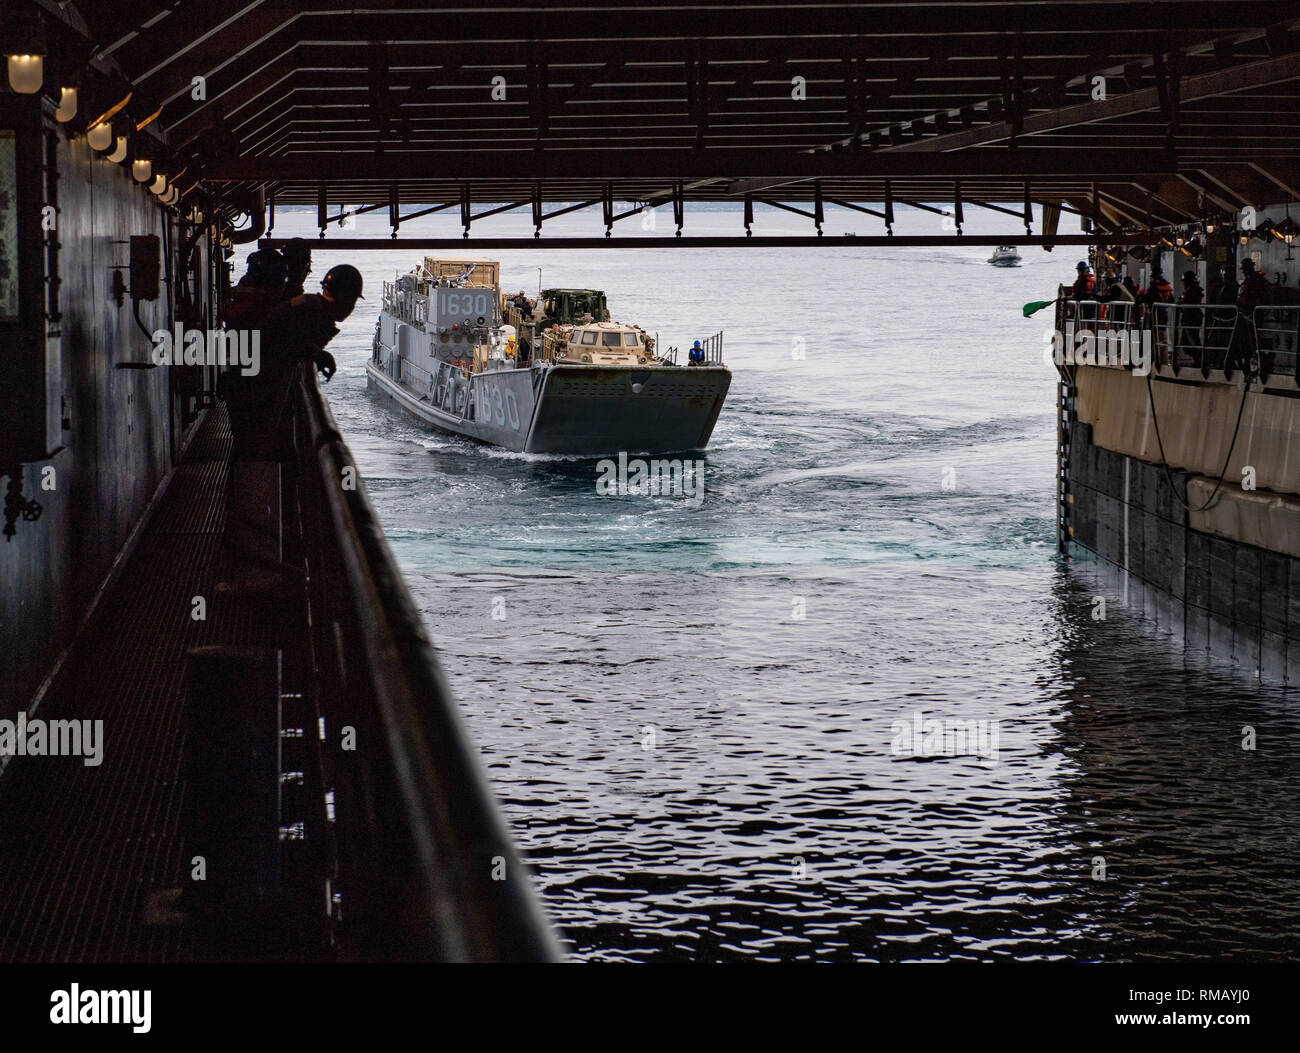 190212-N-HD110-0170  PACIFIC OCEAN (Feb. 12, 2019) Sailors observe Landing Craft, Utility 1630 assigned to Assault Craft Unit (ACU) 1 enter the well deck of the Harpers Ferry-class amphibious dock landing ship USS Harpers Ferry (LSD 49). Harpers Ferry is underway conducting routine operations as a part of USS Boxer Amphibious Ready Group (ARG) in the eastern Pacific Ocean. (U.S. Navy photo by Mass Communication Specialist 3rd Class Danielle A. Baker) Stock Photo